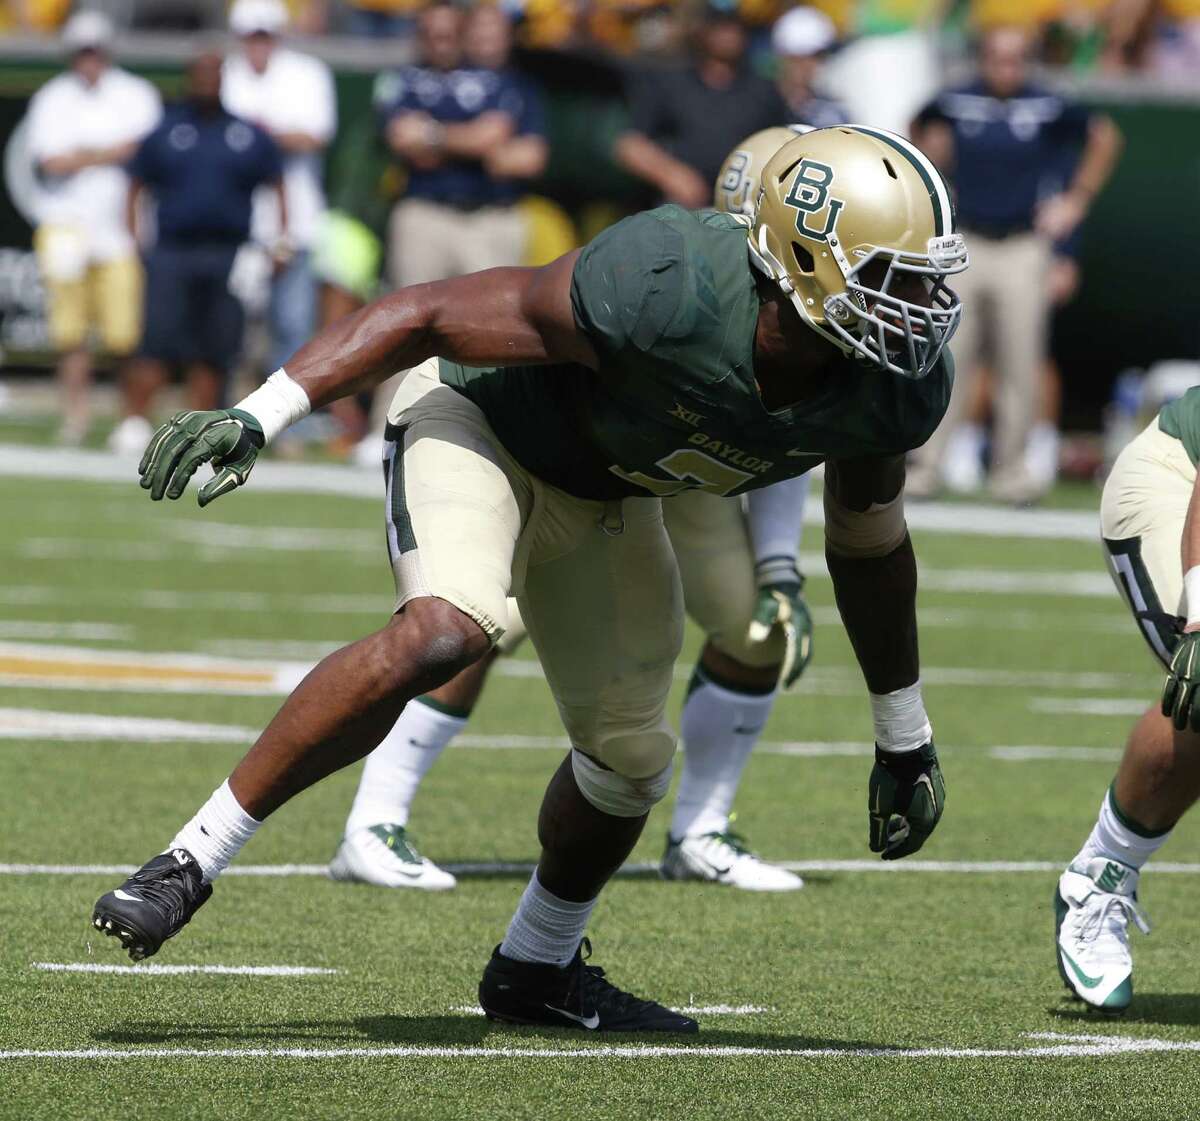 Baylor defensive end Shawn Oakman (2) comes off the line against Rice in the first half of an NCAA college football game, Saturday, Sept. 26, 2015, in Waco, Texas.